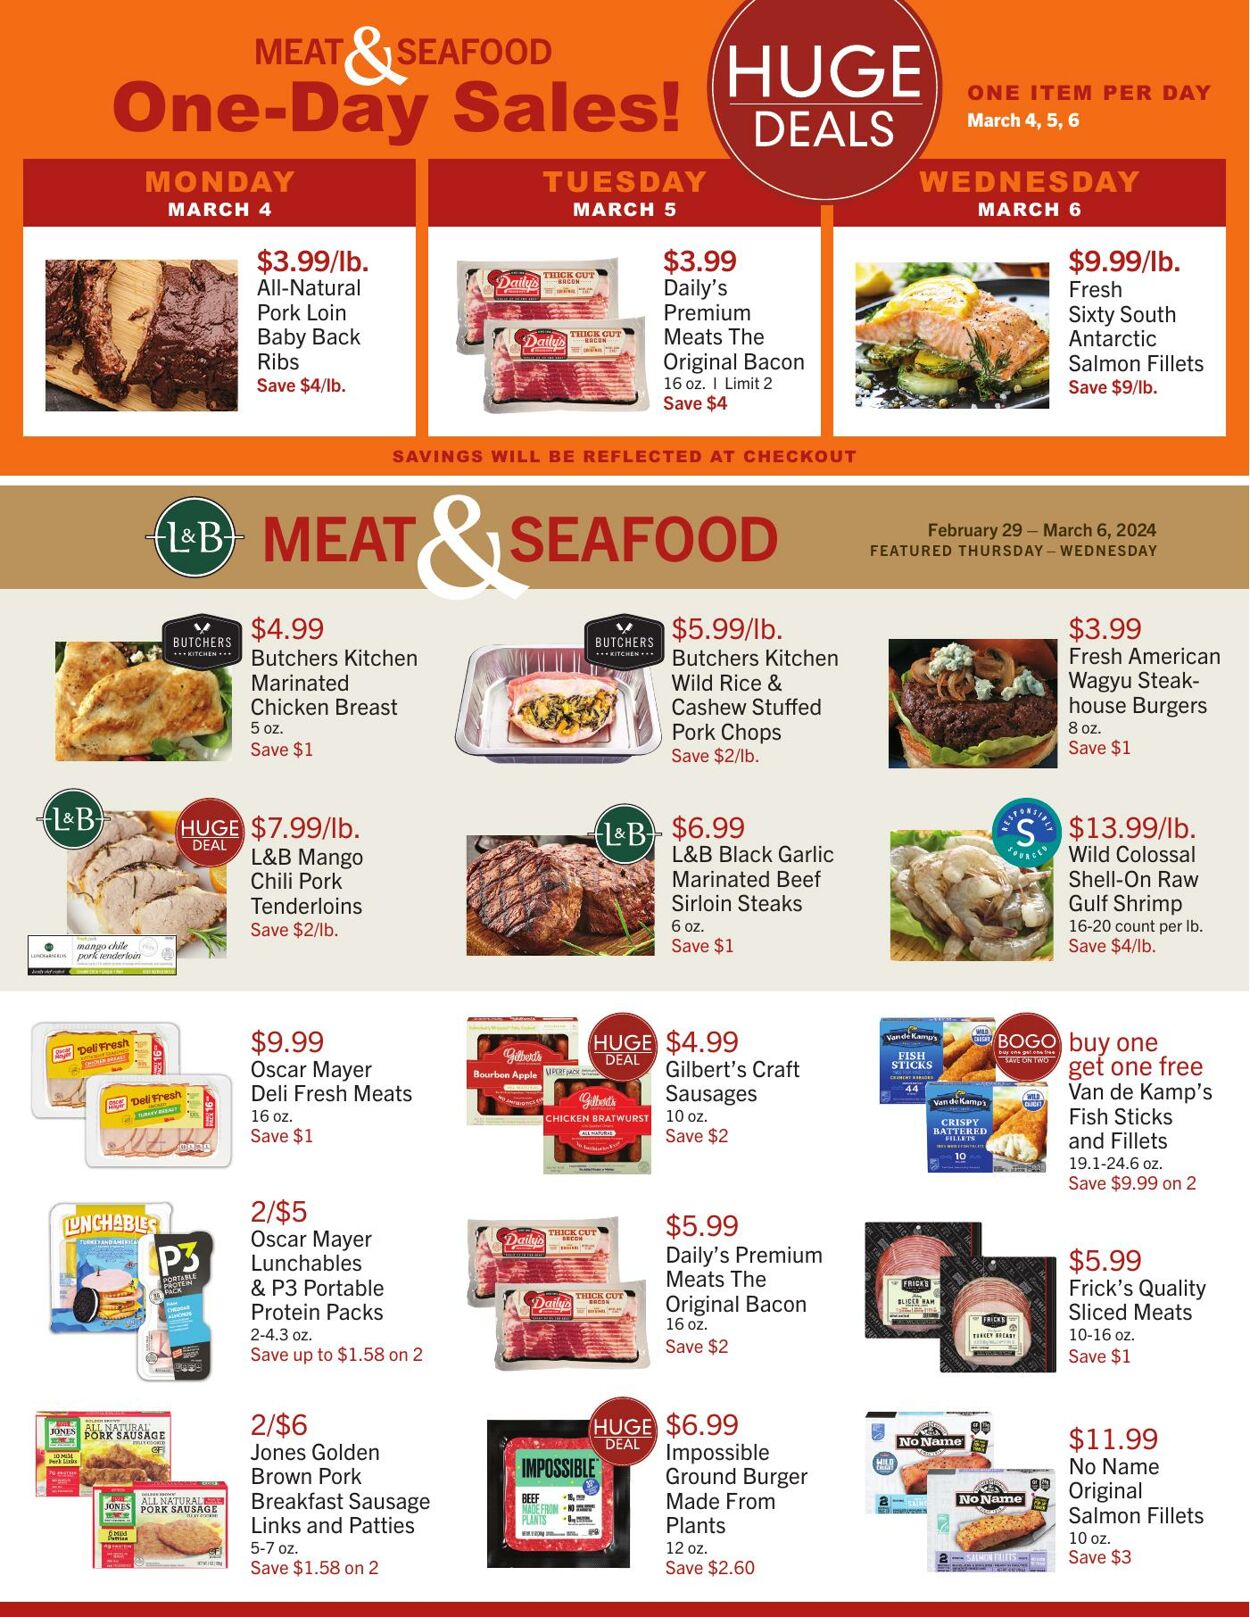 Weekly ad Lunds & Byerlys 02/29/2024 - 03/06/2024